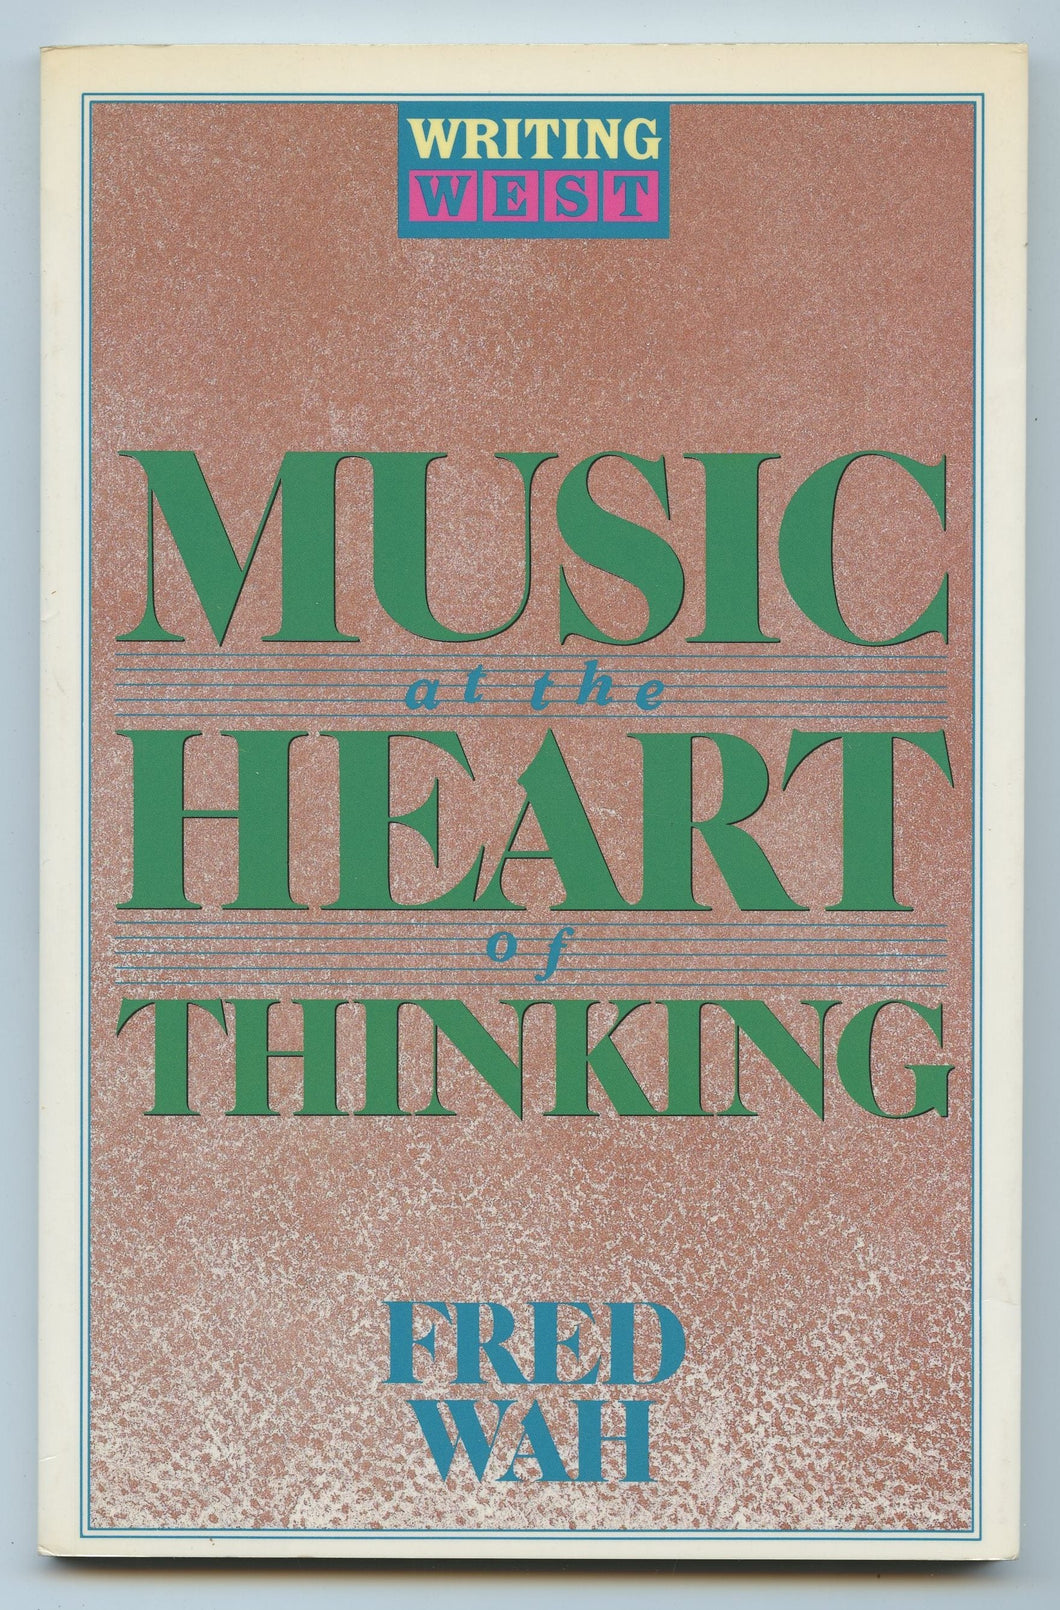 Music at the Heart of Thinking